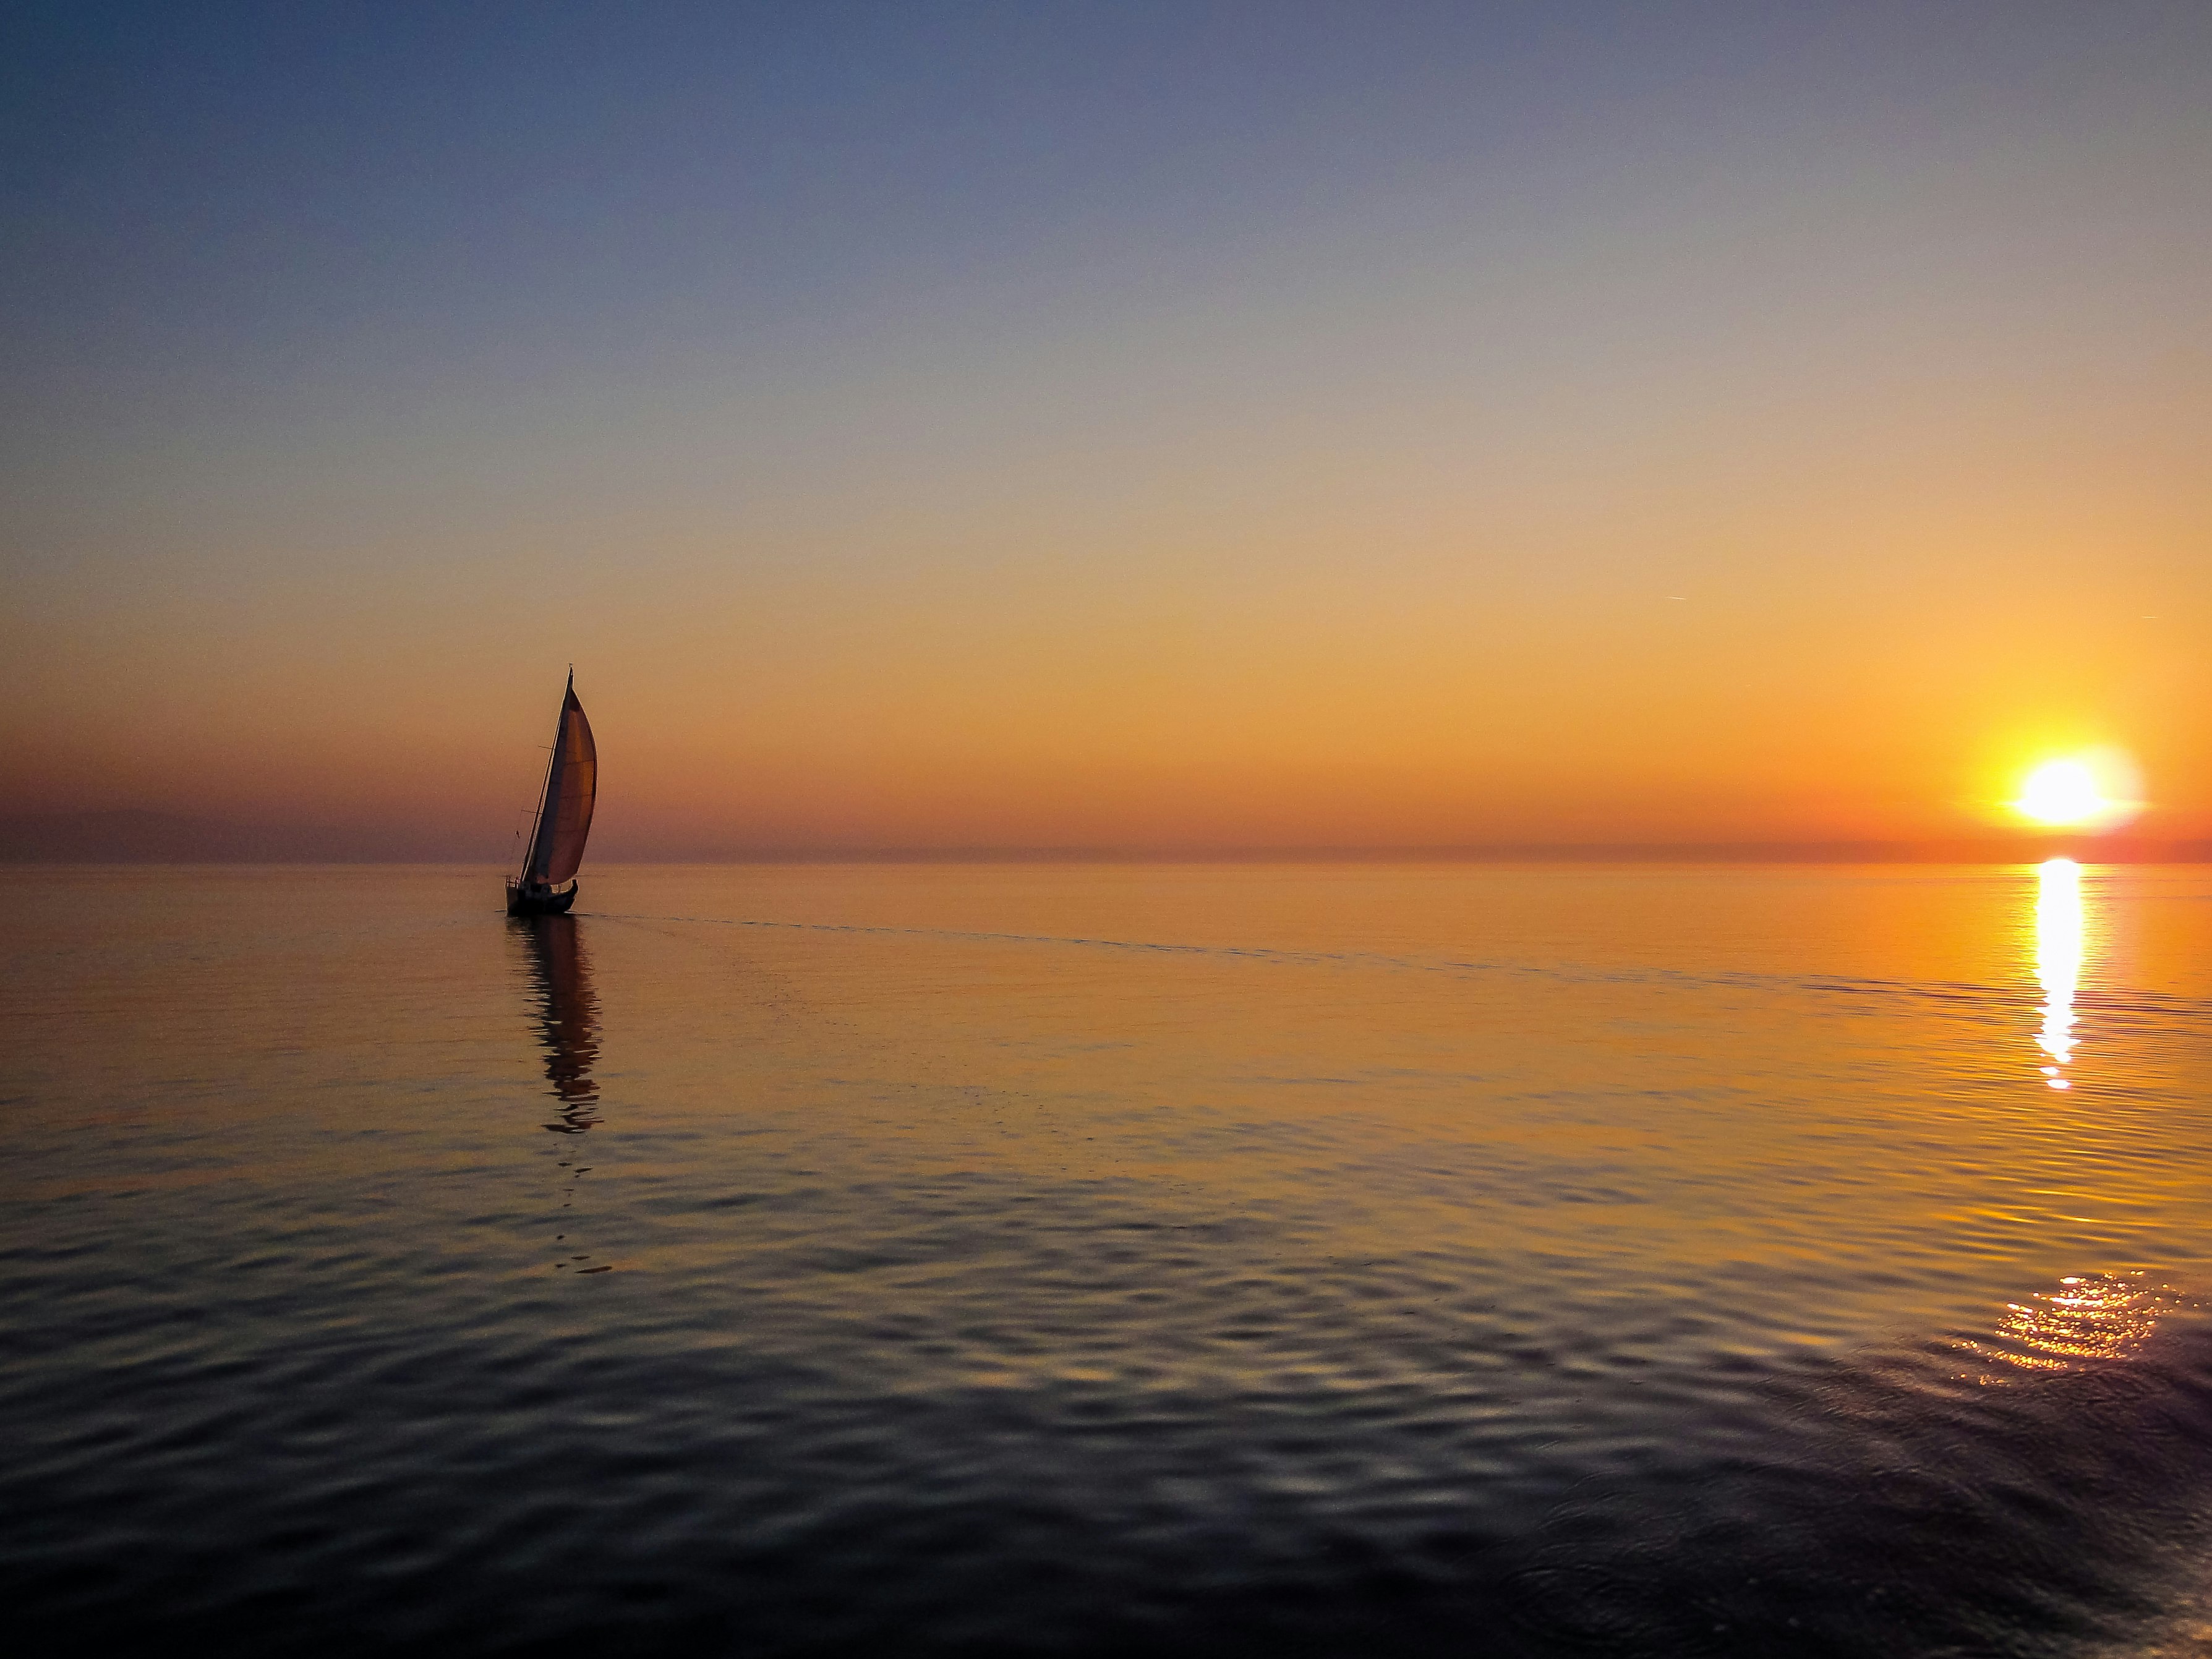 silhouette of sail boat on body of water